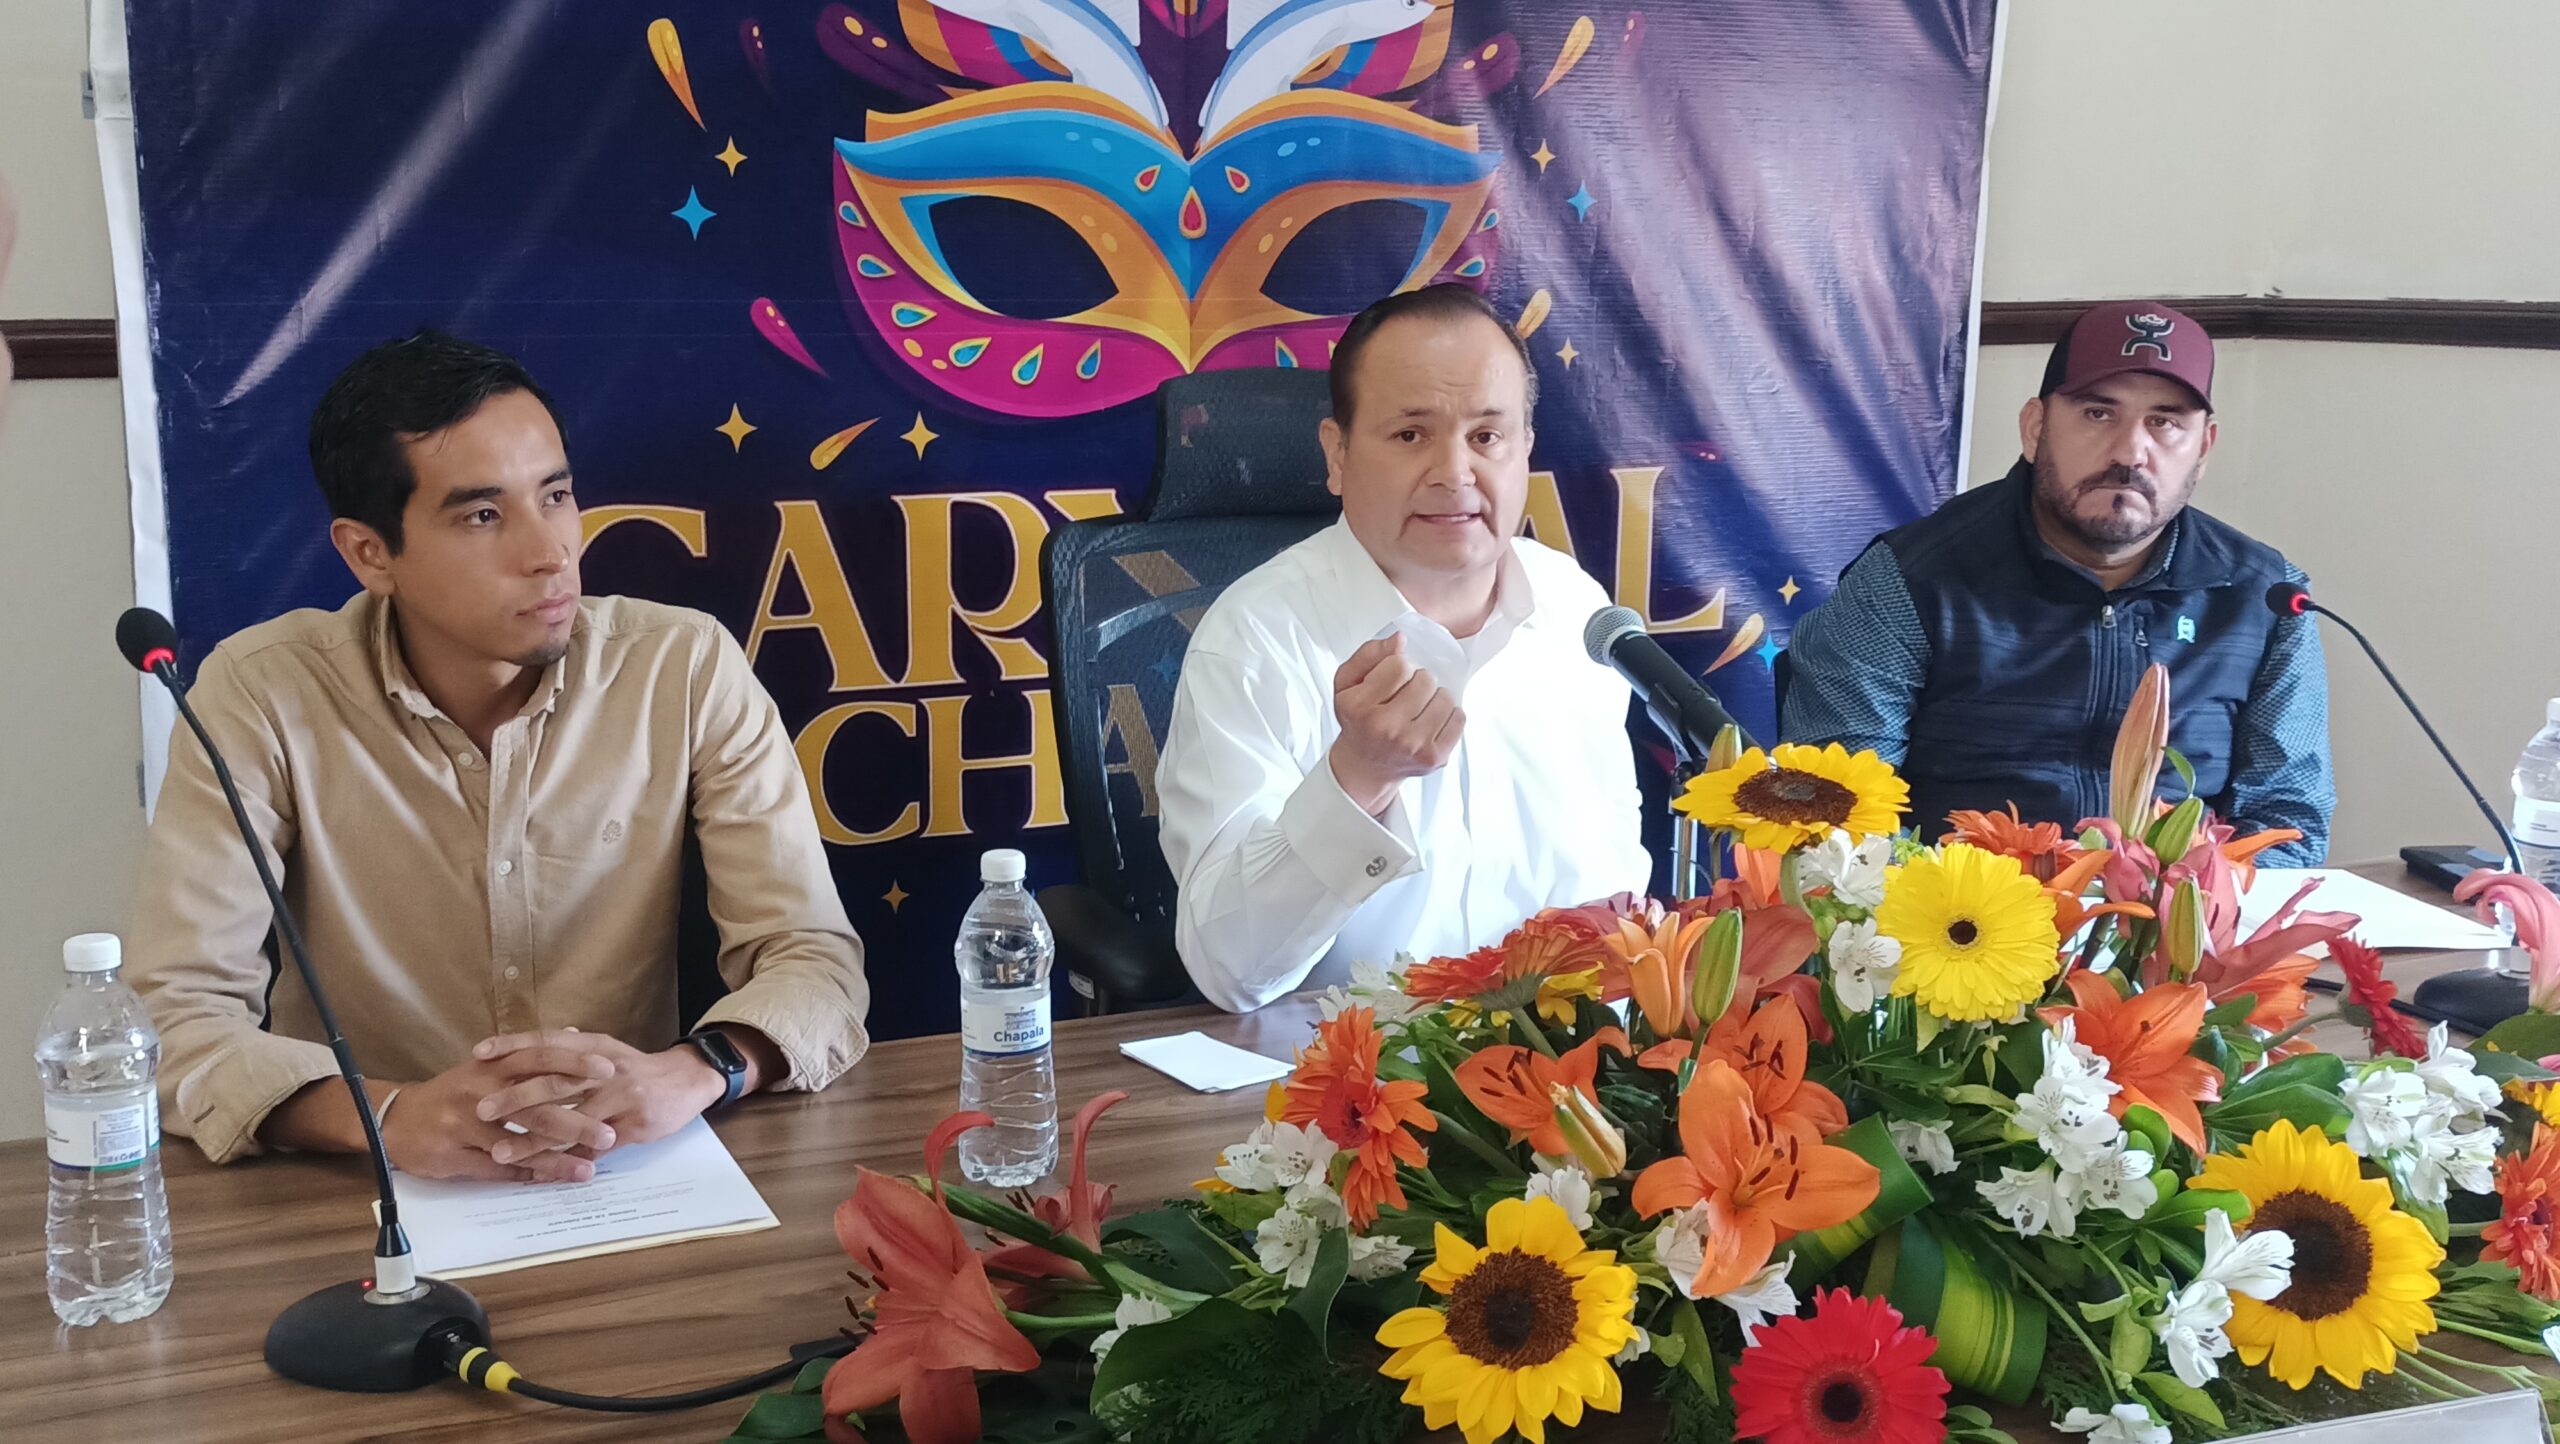 Two venues announced for Chapala Carnival slated for February 16-21